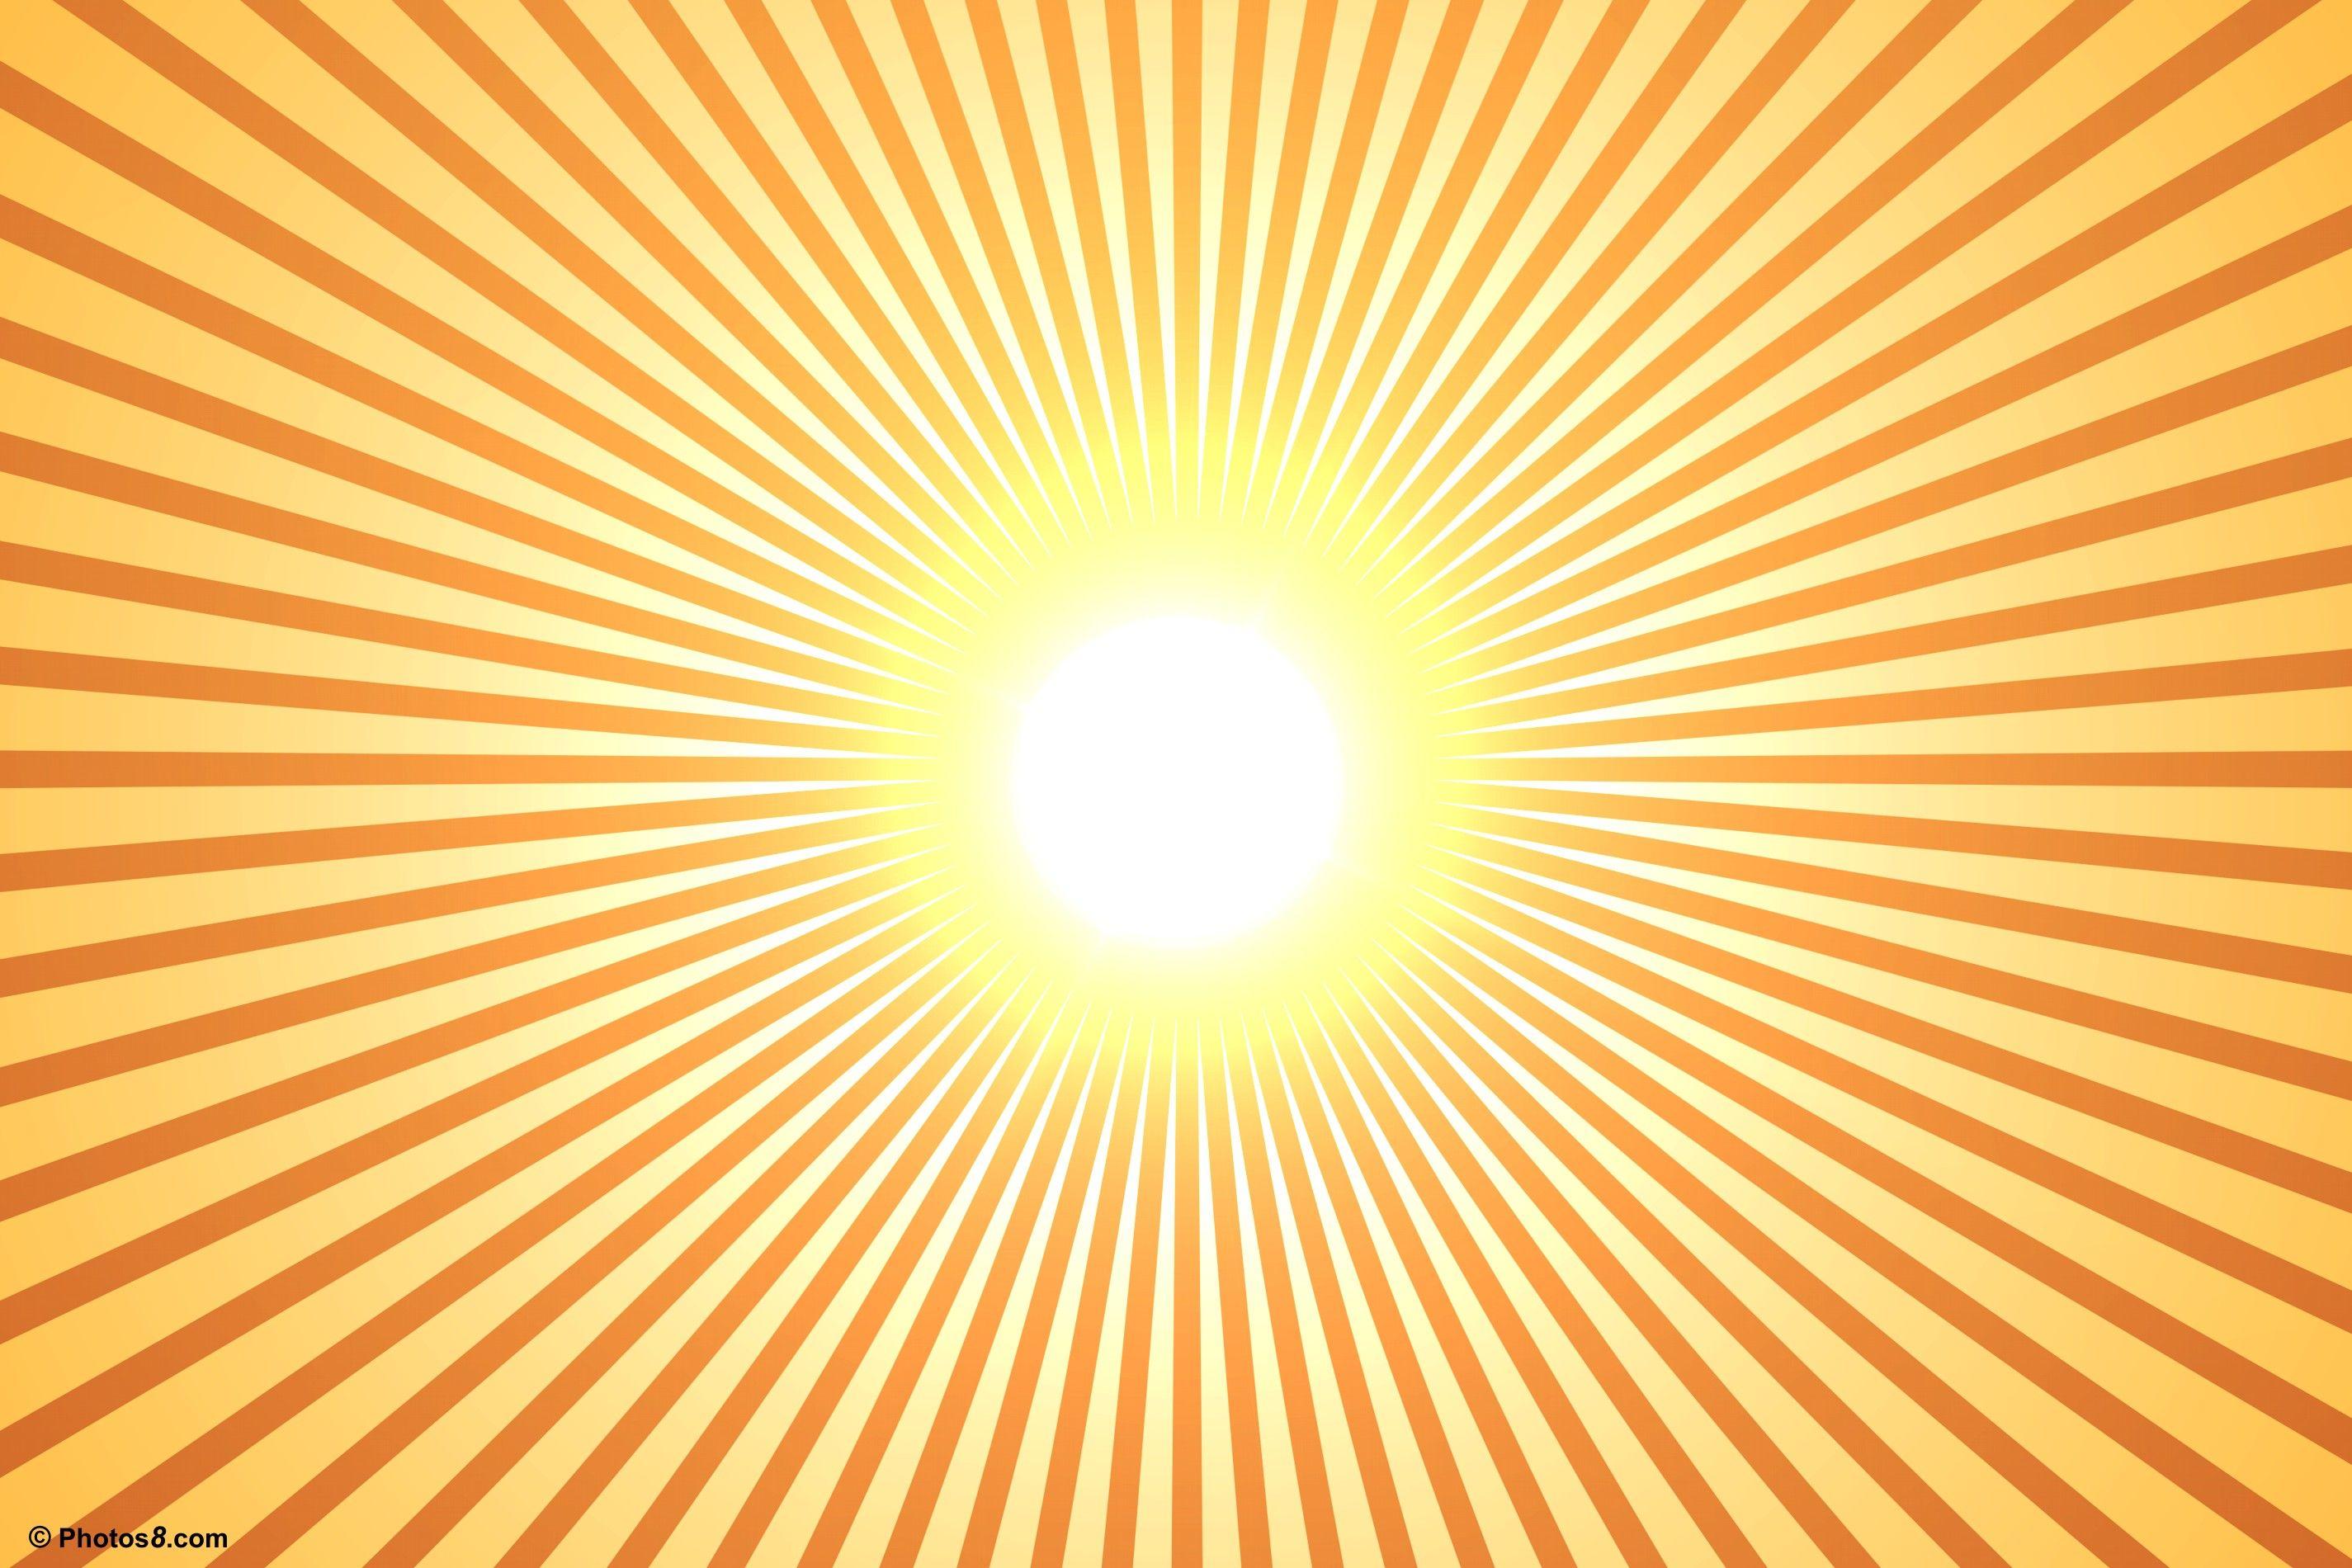 Sun Rays Wallpaper. Sun Rays Background and Image (38)